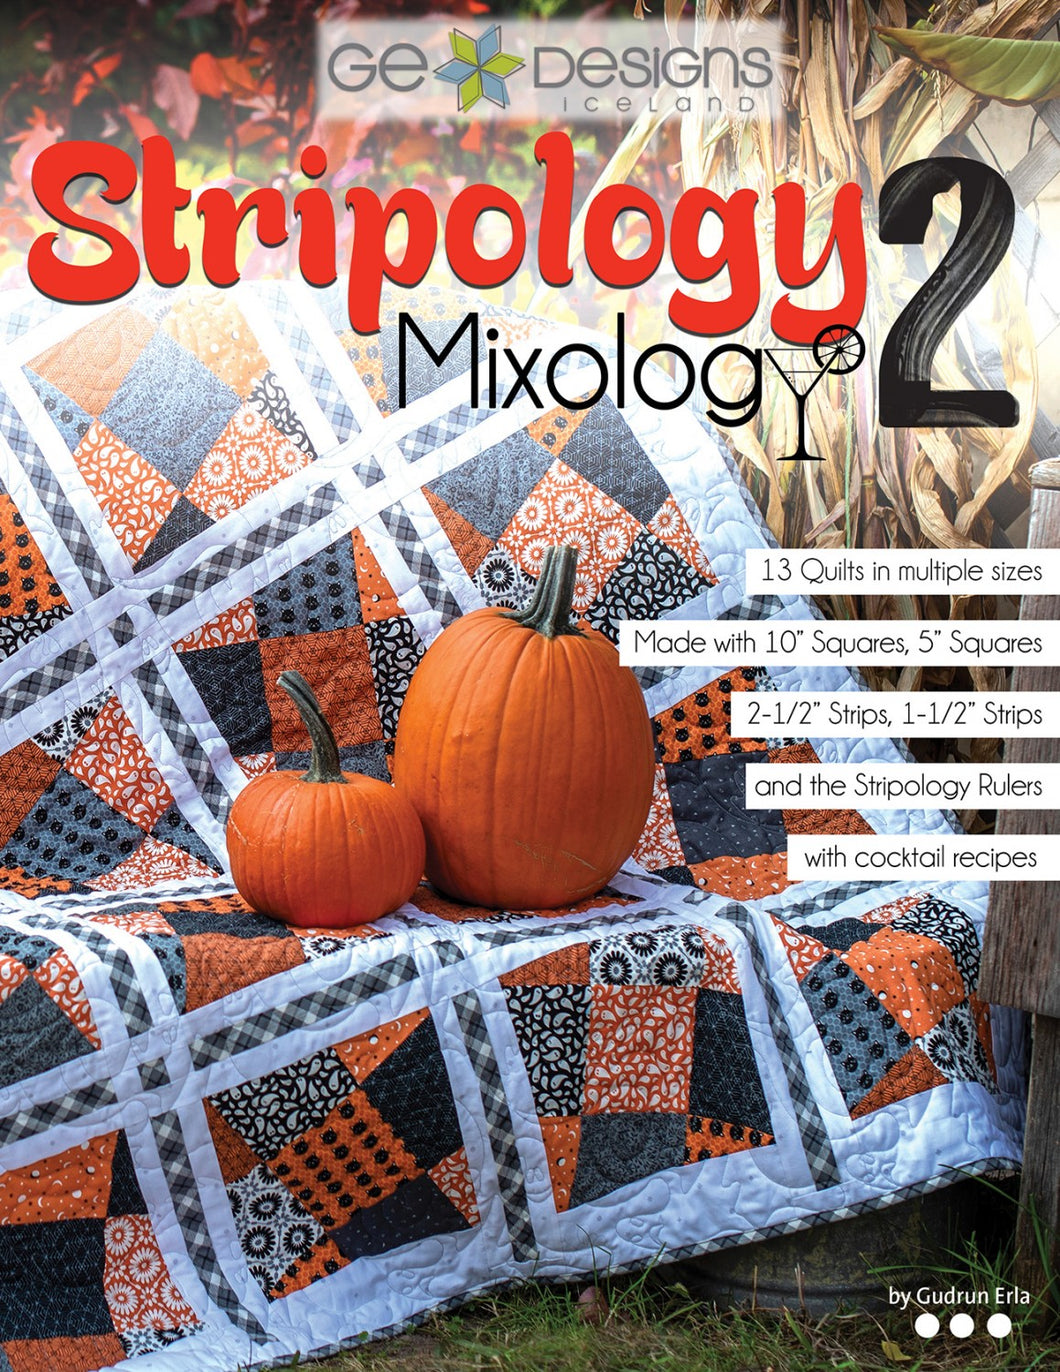 Stripology Mixology 2 by Gudron Erla from G. E. Designs